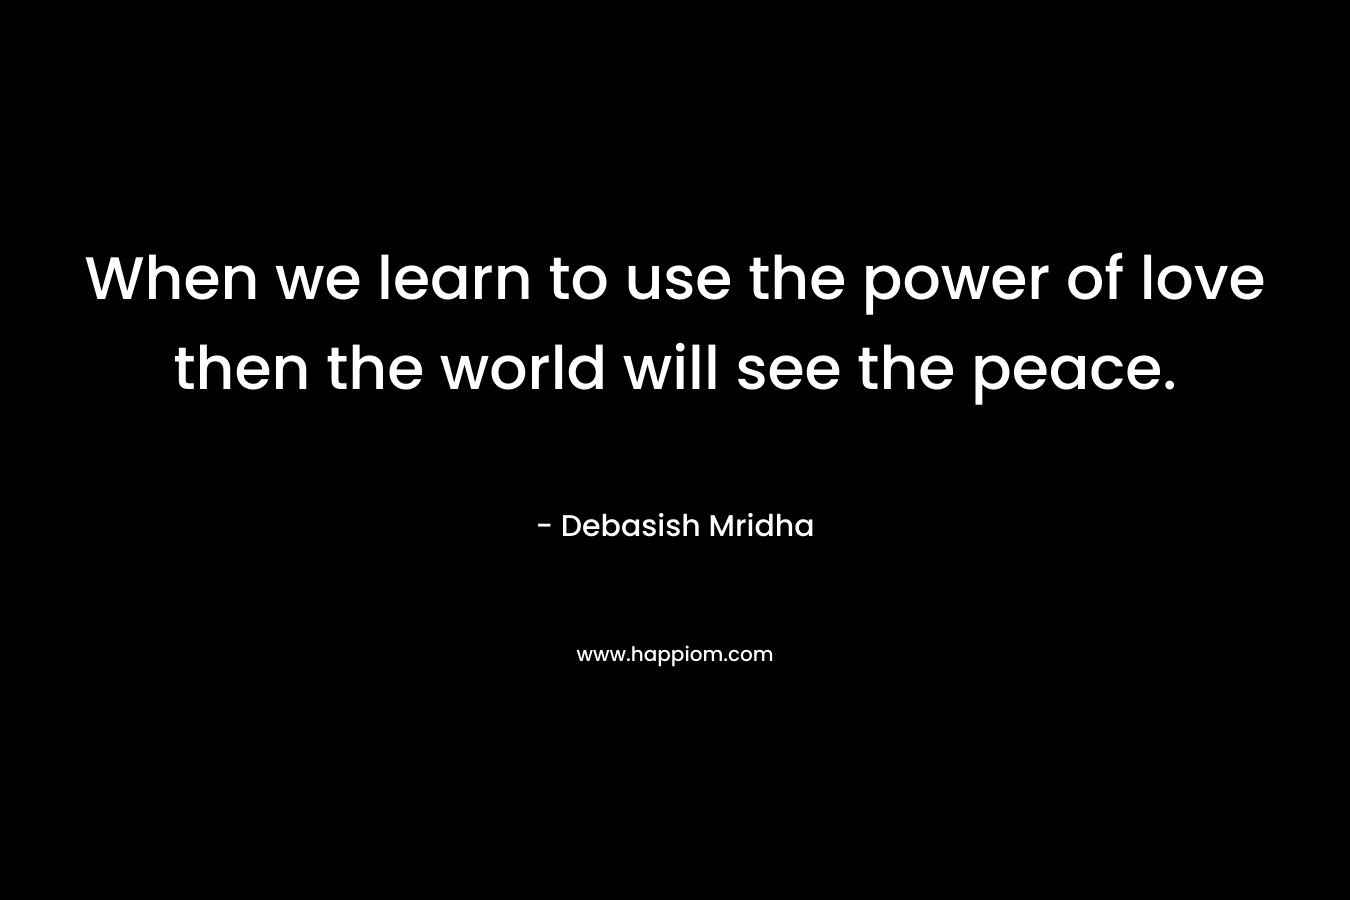 When we learn to use the power of love then the world will see the peace.